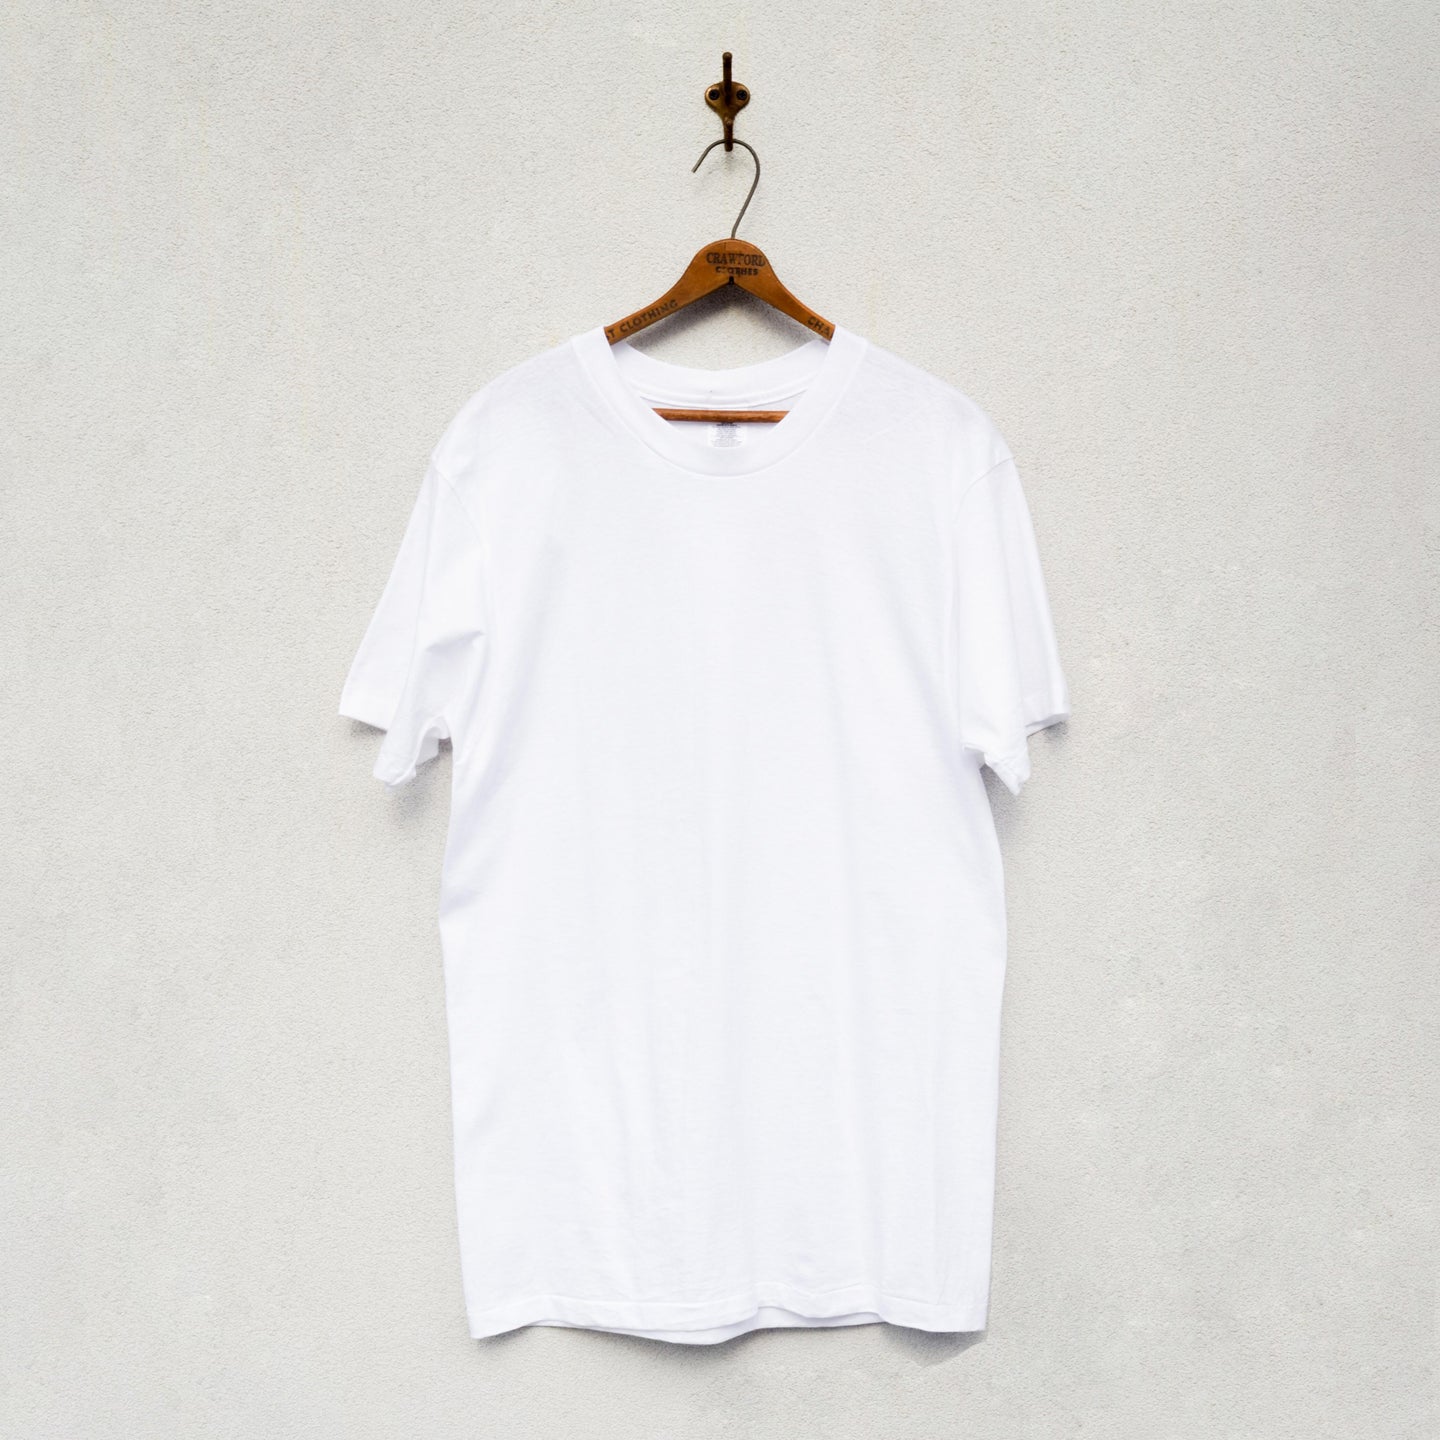 Hanes - All Cotton Crew Neck Pack T shirt